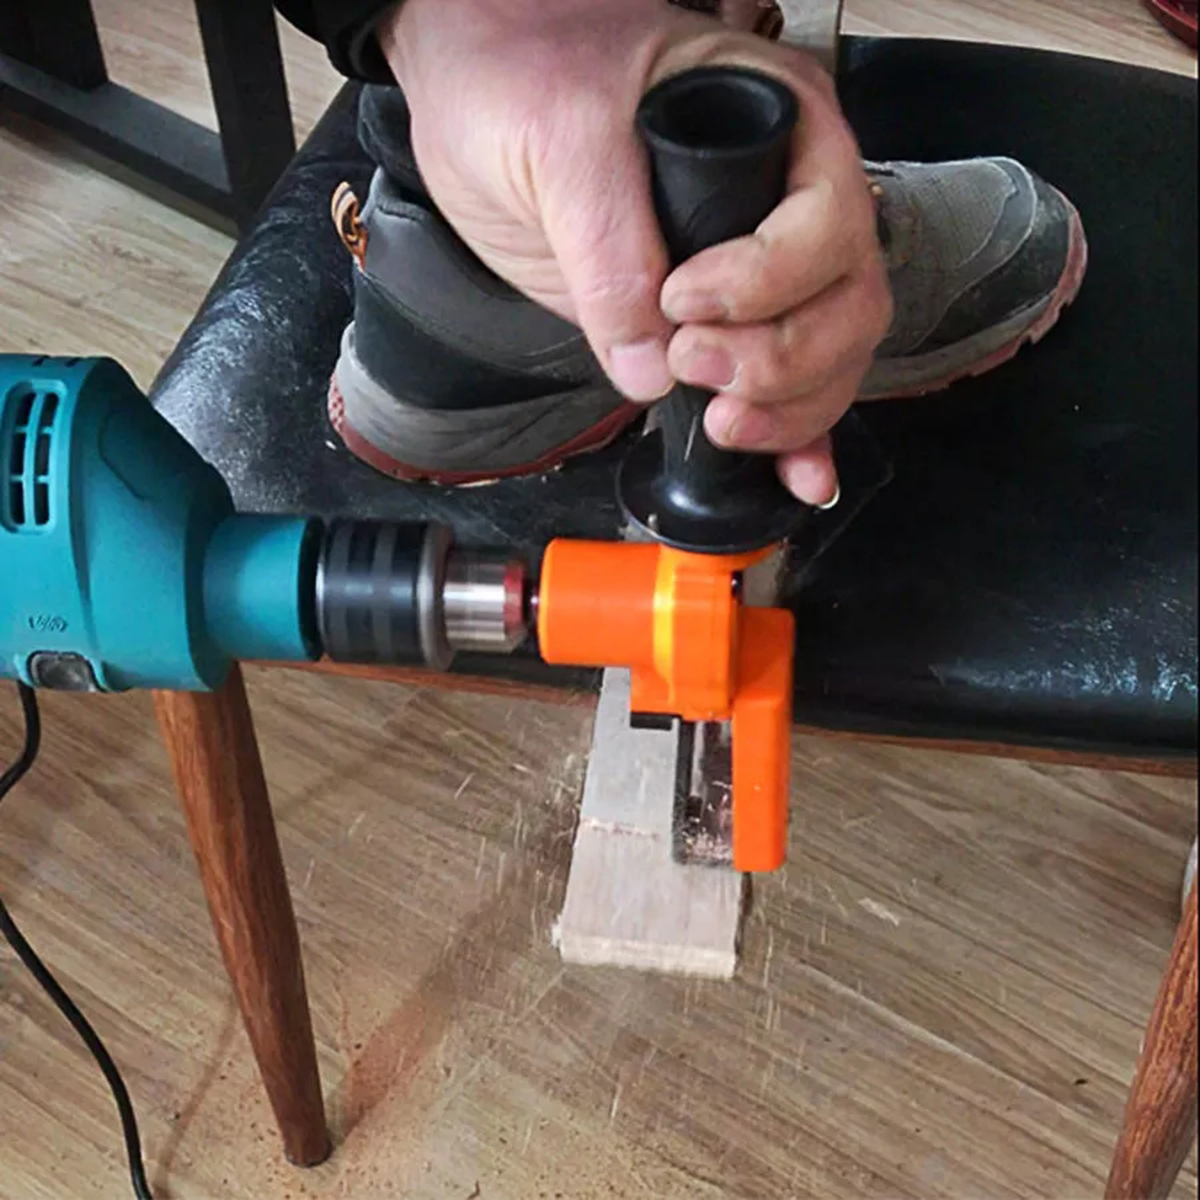 Reciprocating-Saw-Attachment-Adapter-Change-Electric-Drill-Into-Reciprocating-Saw-for-Wood-Metal-Cut-1725363-7